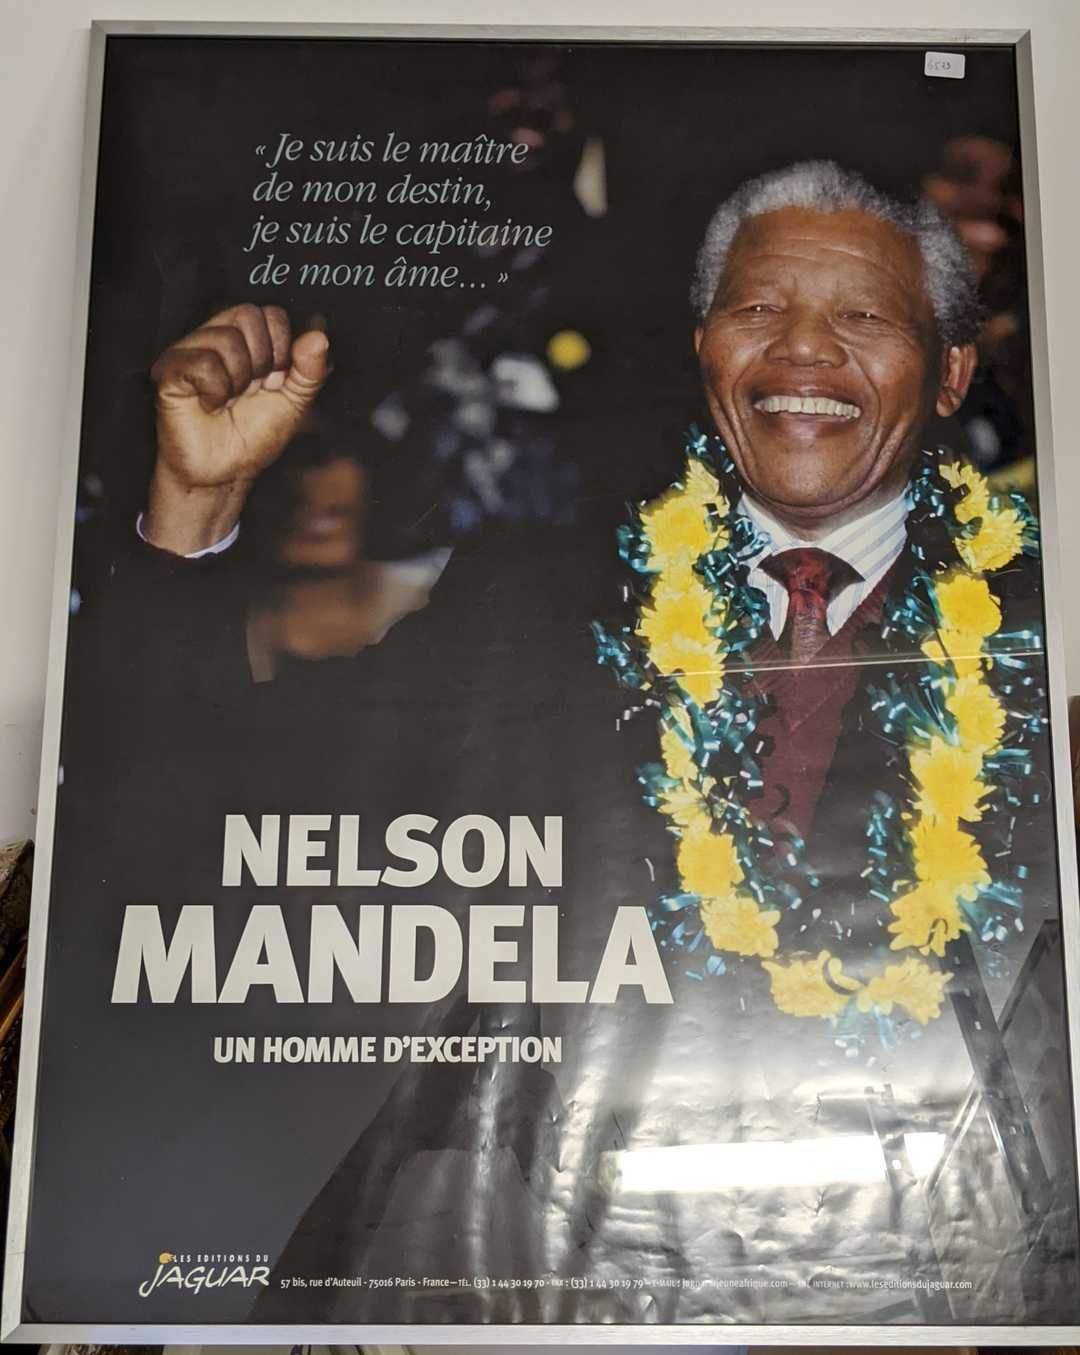 Null Poster representing "Nelson MANDELA a man of exception

79 x 59 cm